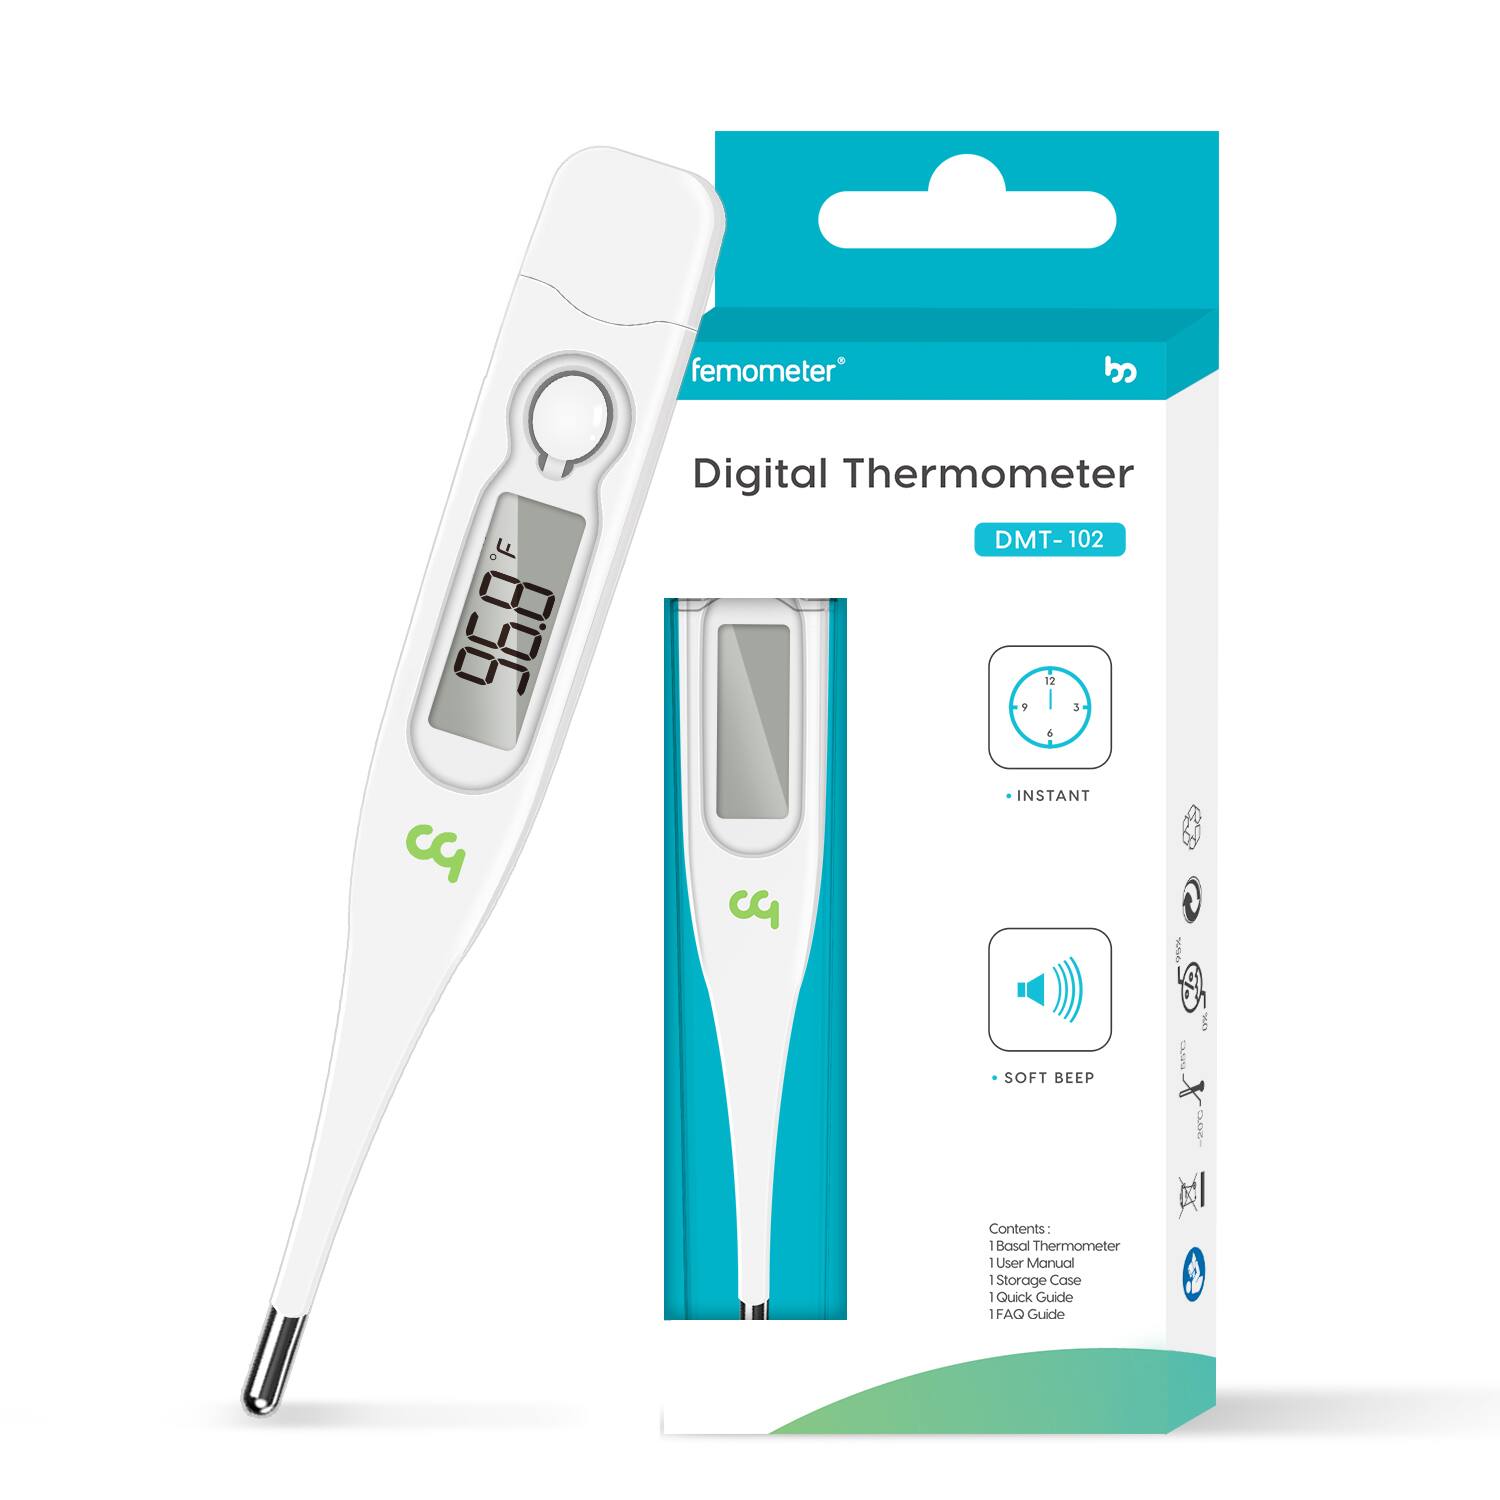 Digital Body Thermometer - $1.99 + FS with Prime